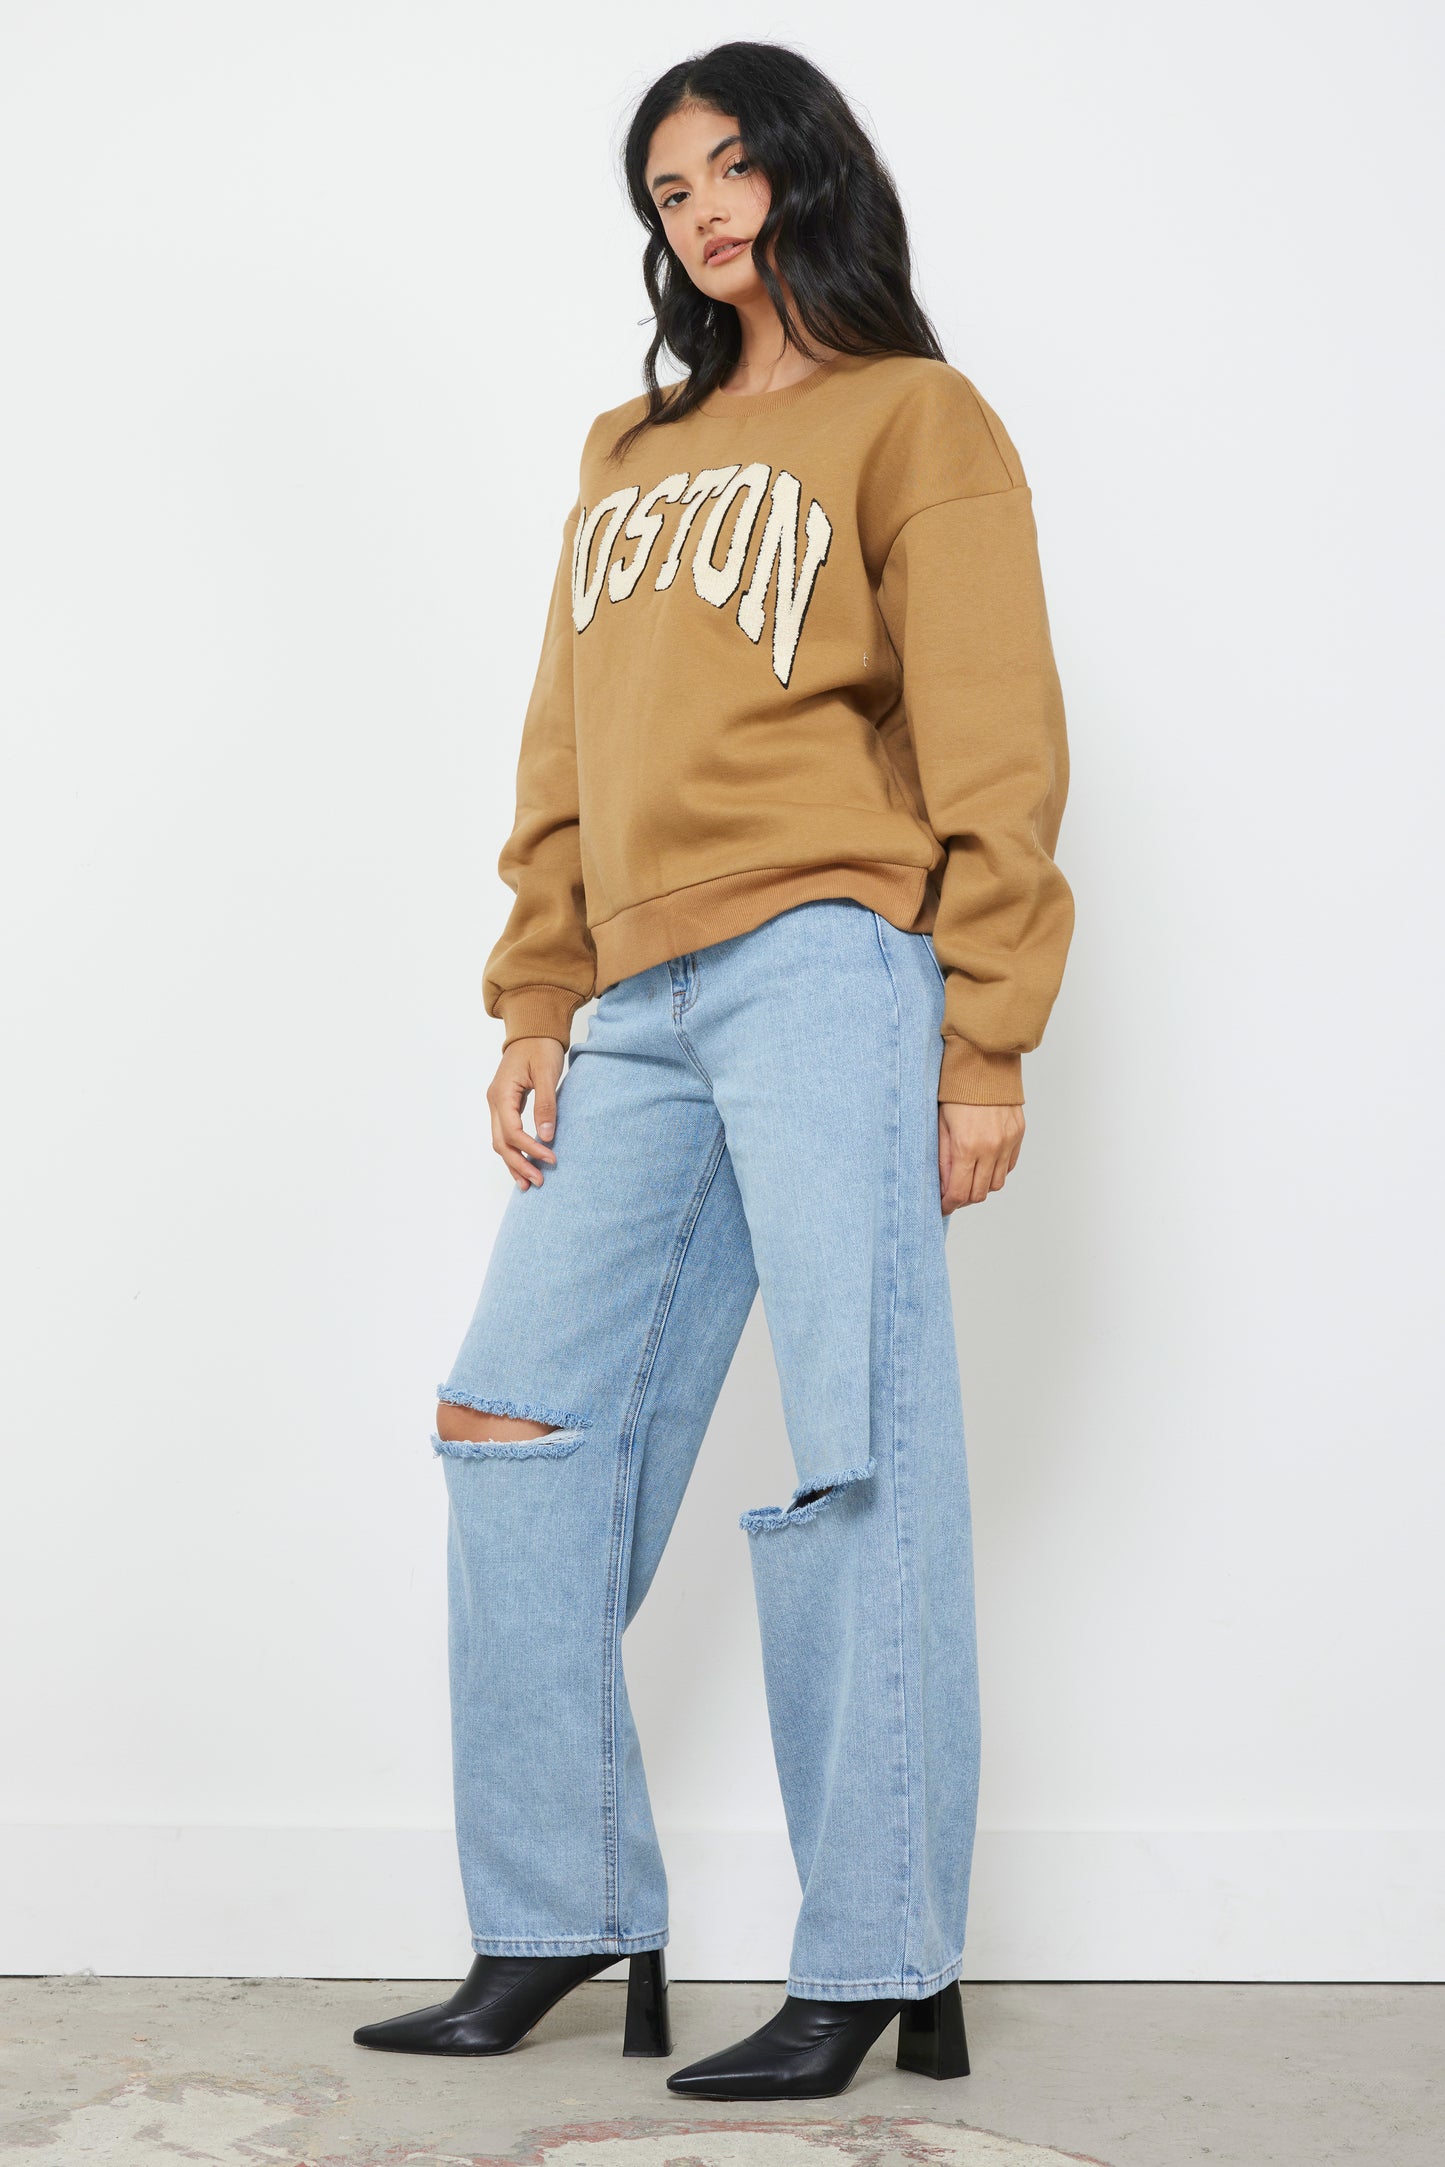 If You Can Make It There Straw Sweatshirt